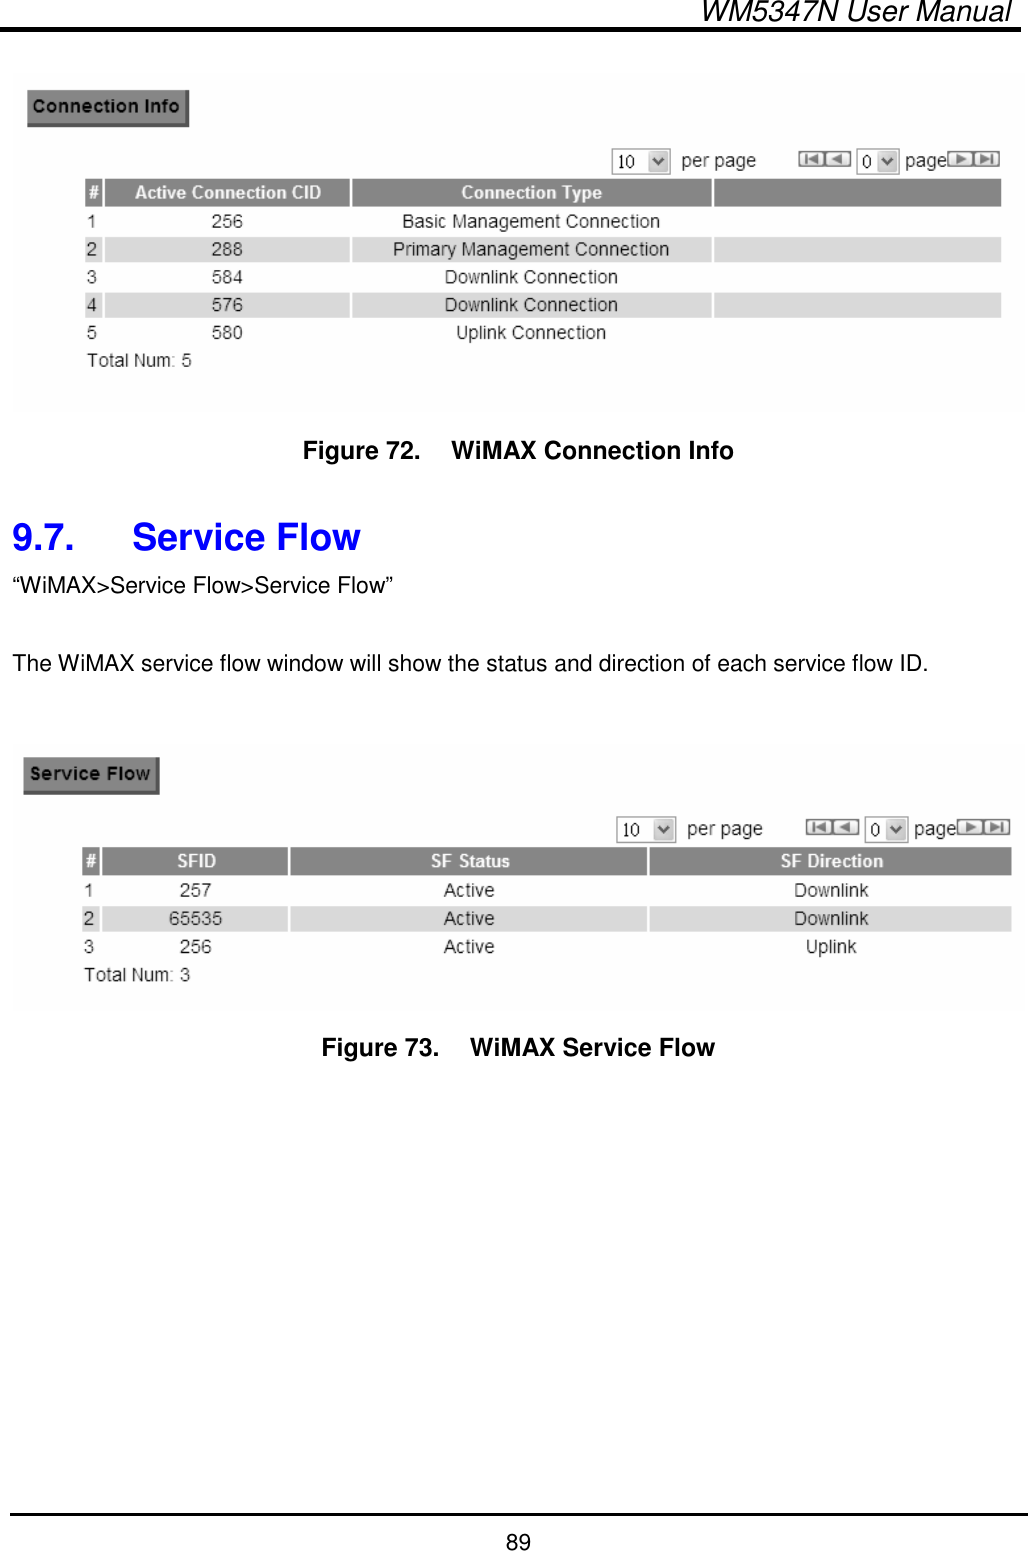  WM5347N User Manual  89  Figure 72.   WiMAX Connection Info  9.7.  Service Flow “WiMAX&gt;Service Flow&gt;Service Flow”  The WiMAX service flow window will show the status and direction of each service flow ID.   Figure 73.   WiMAX Service Flow   